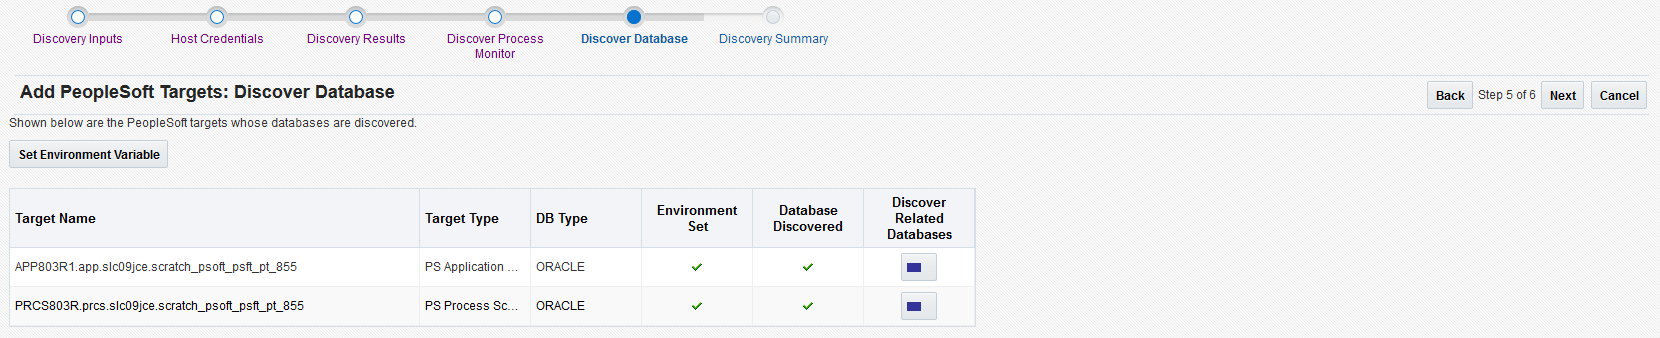 Add PeopleSoft Targets : Discover Database page